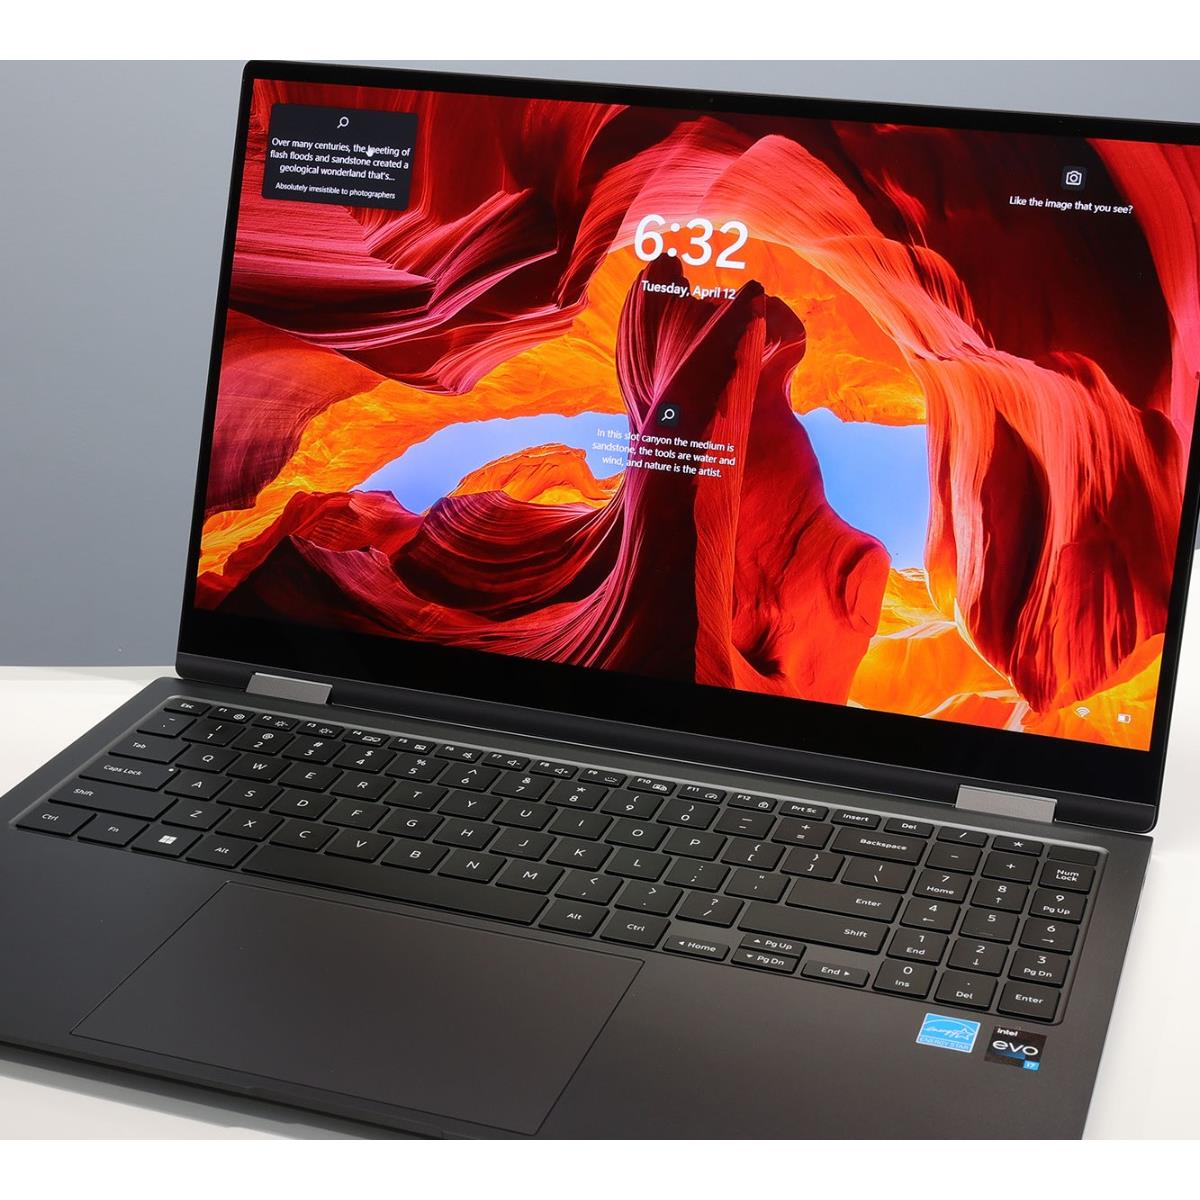 Samsung Galaxy Book 2 Pro 360 review